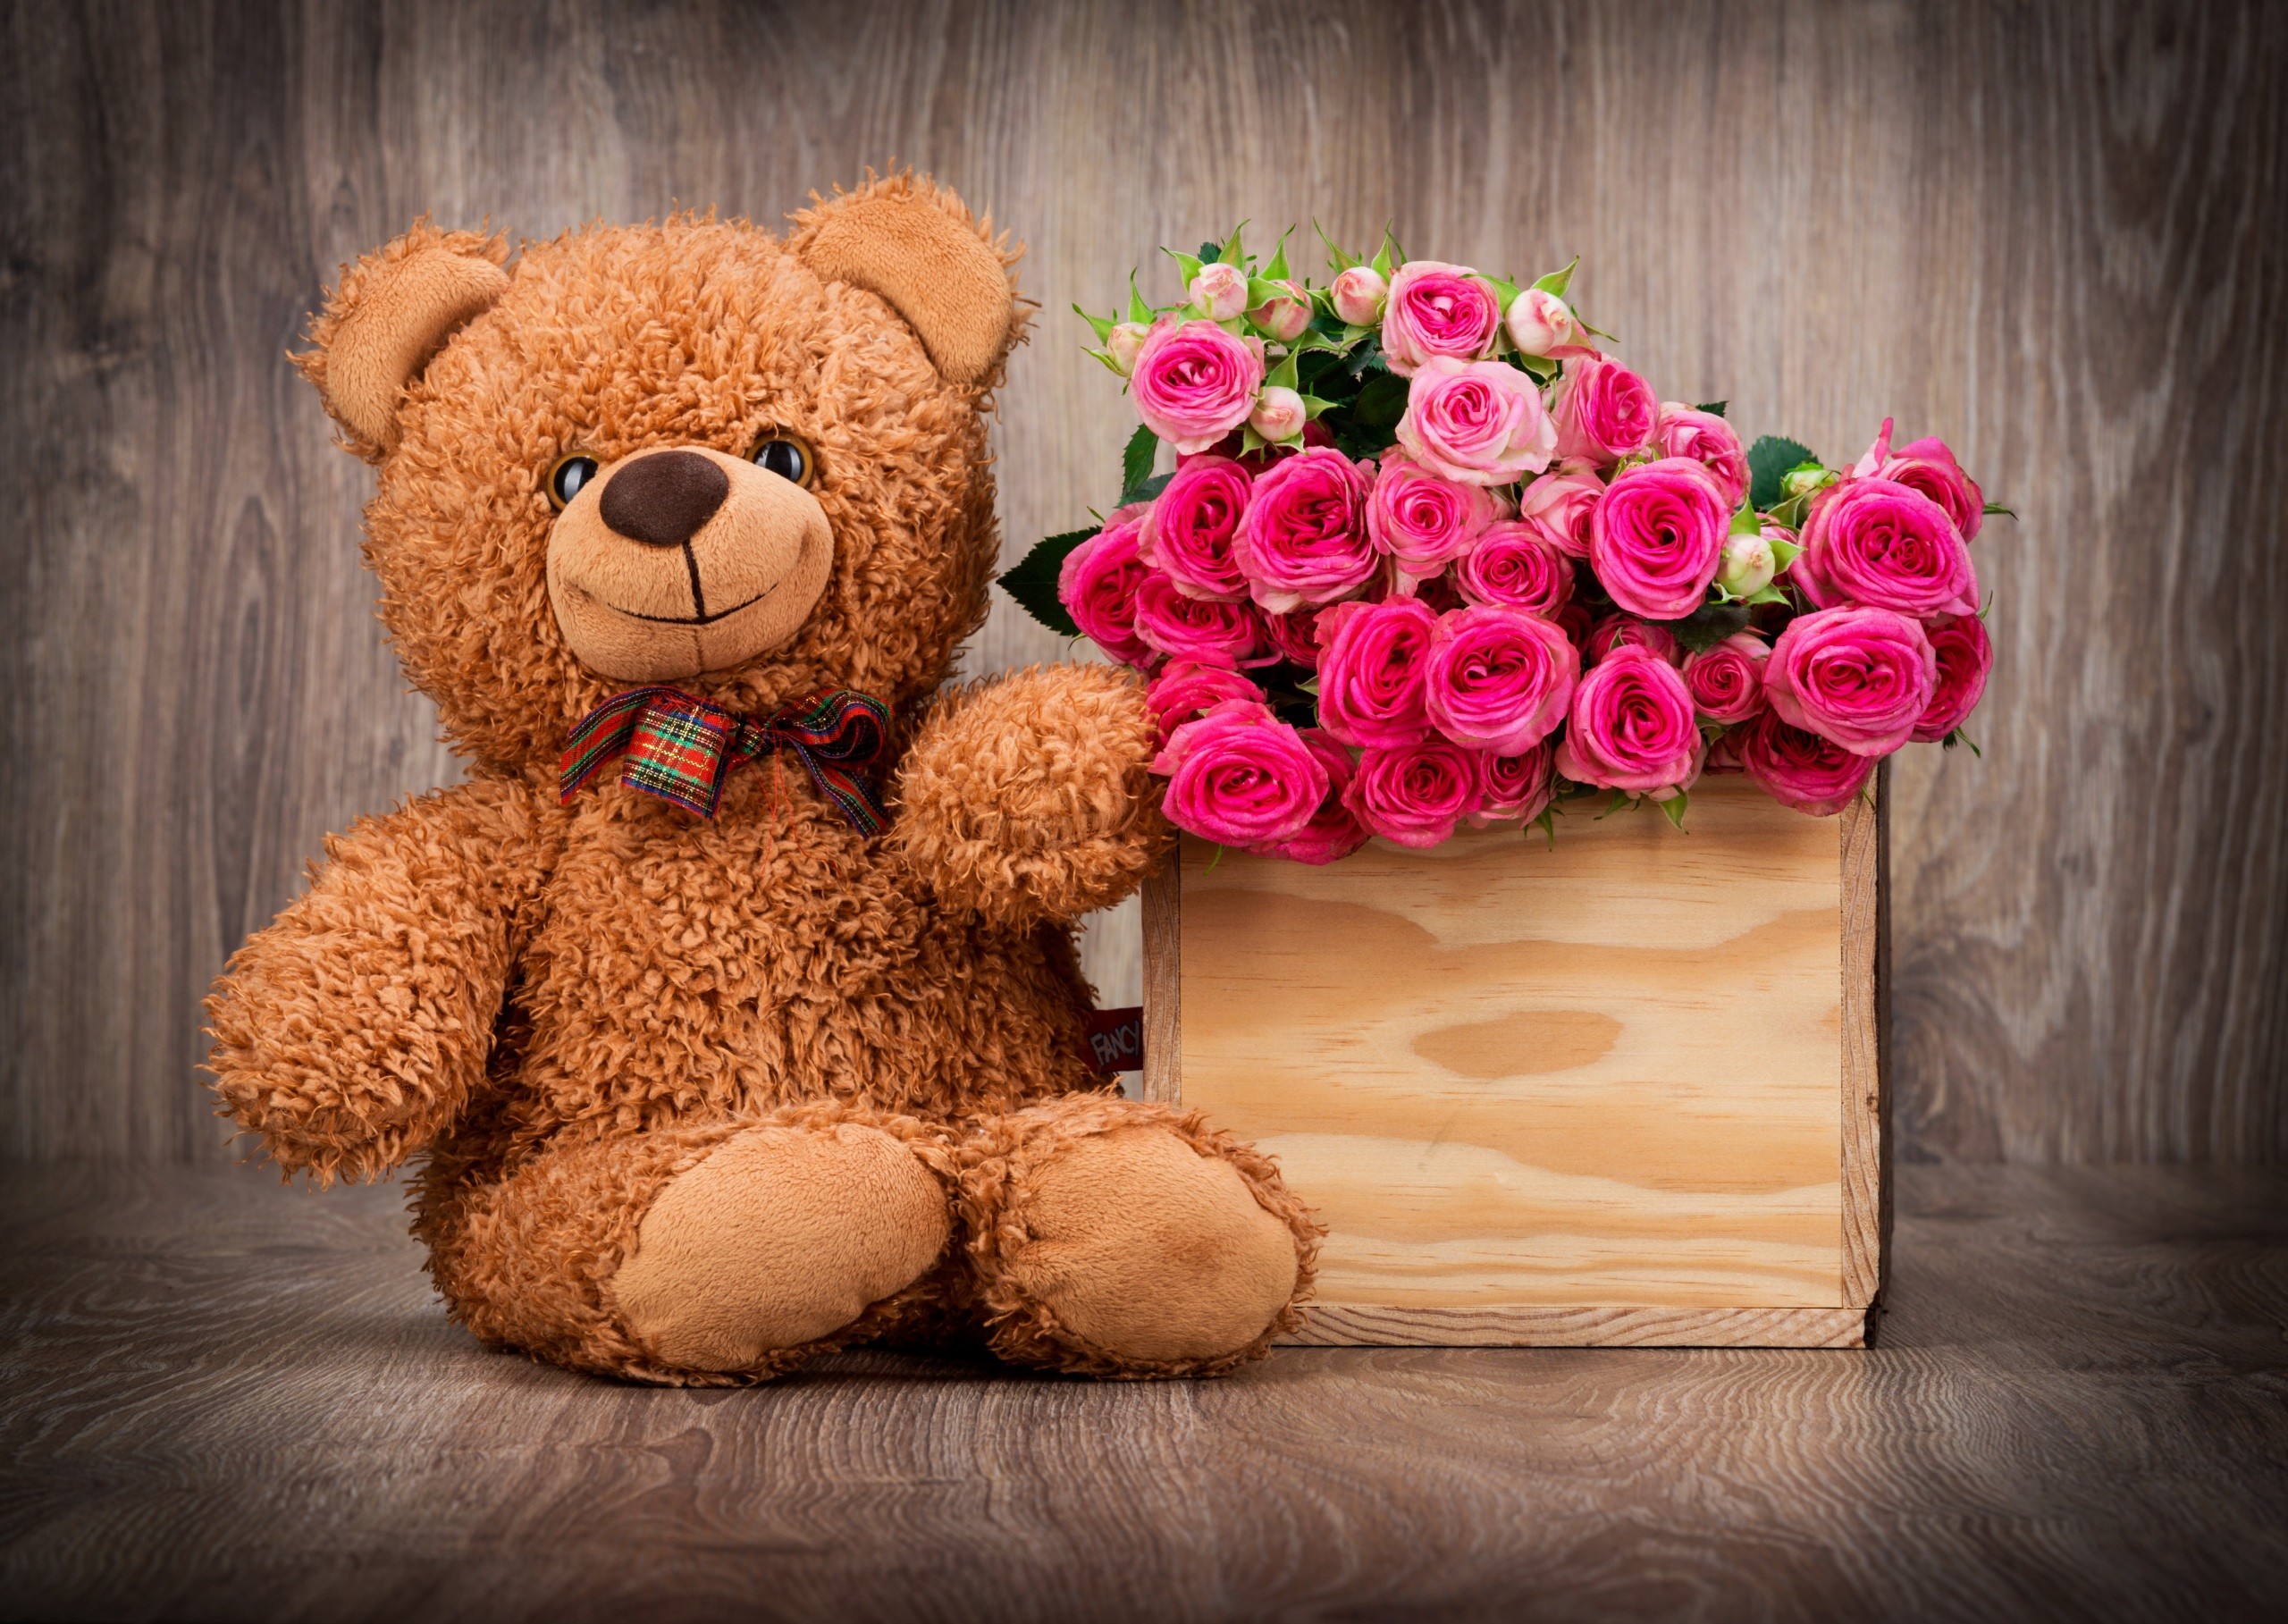 2560x1817 Cute Teddy Bear Wallpaper with Pink Roses in Box | HD Wallpapers for .